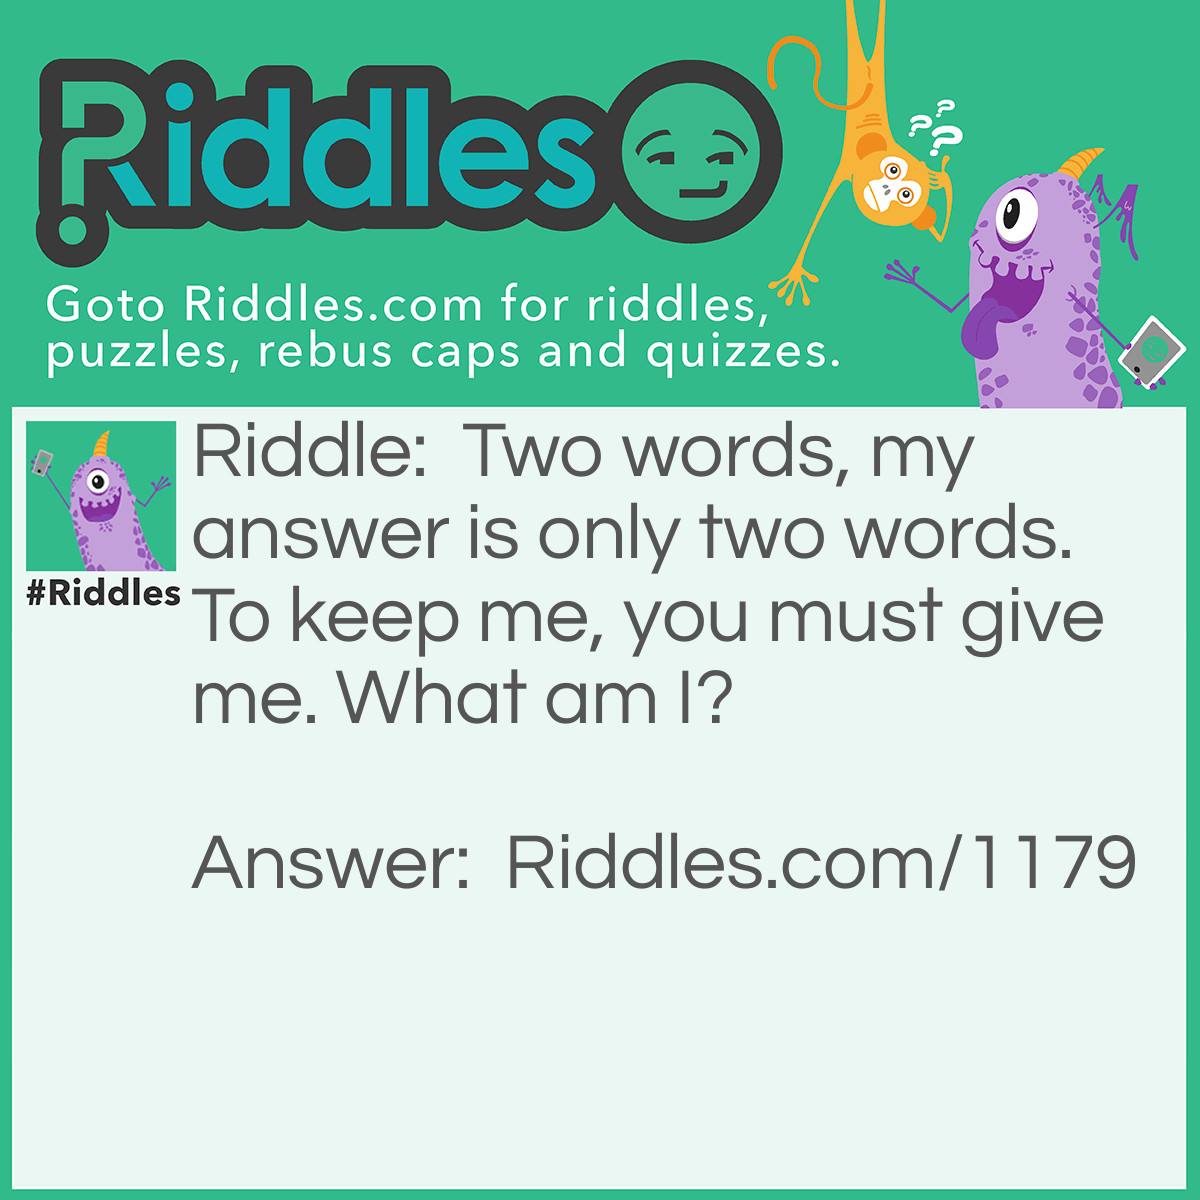 Riddle: Two words, my answer is only two words. To keep me, you must give me. What am I? Answer: Your word.